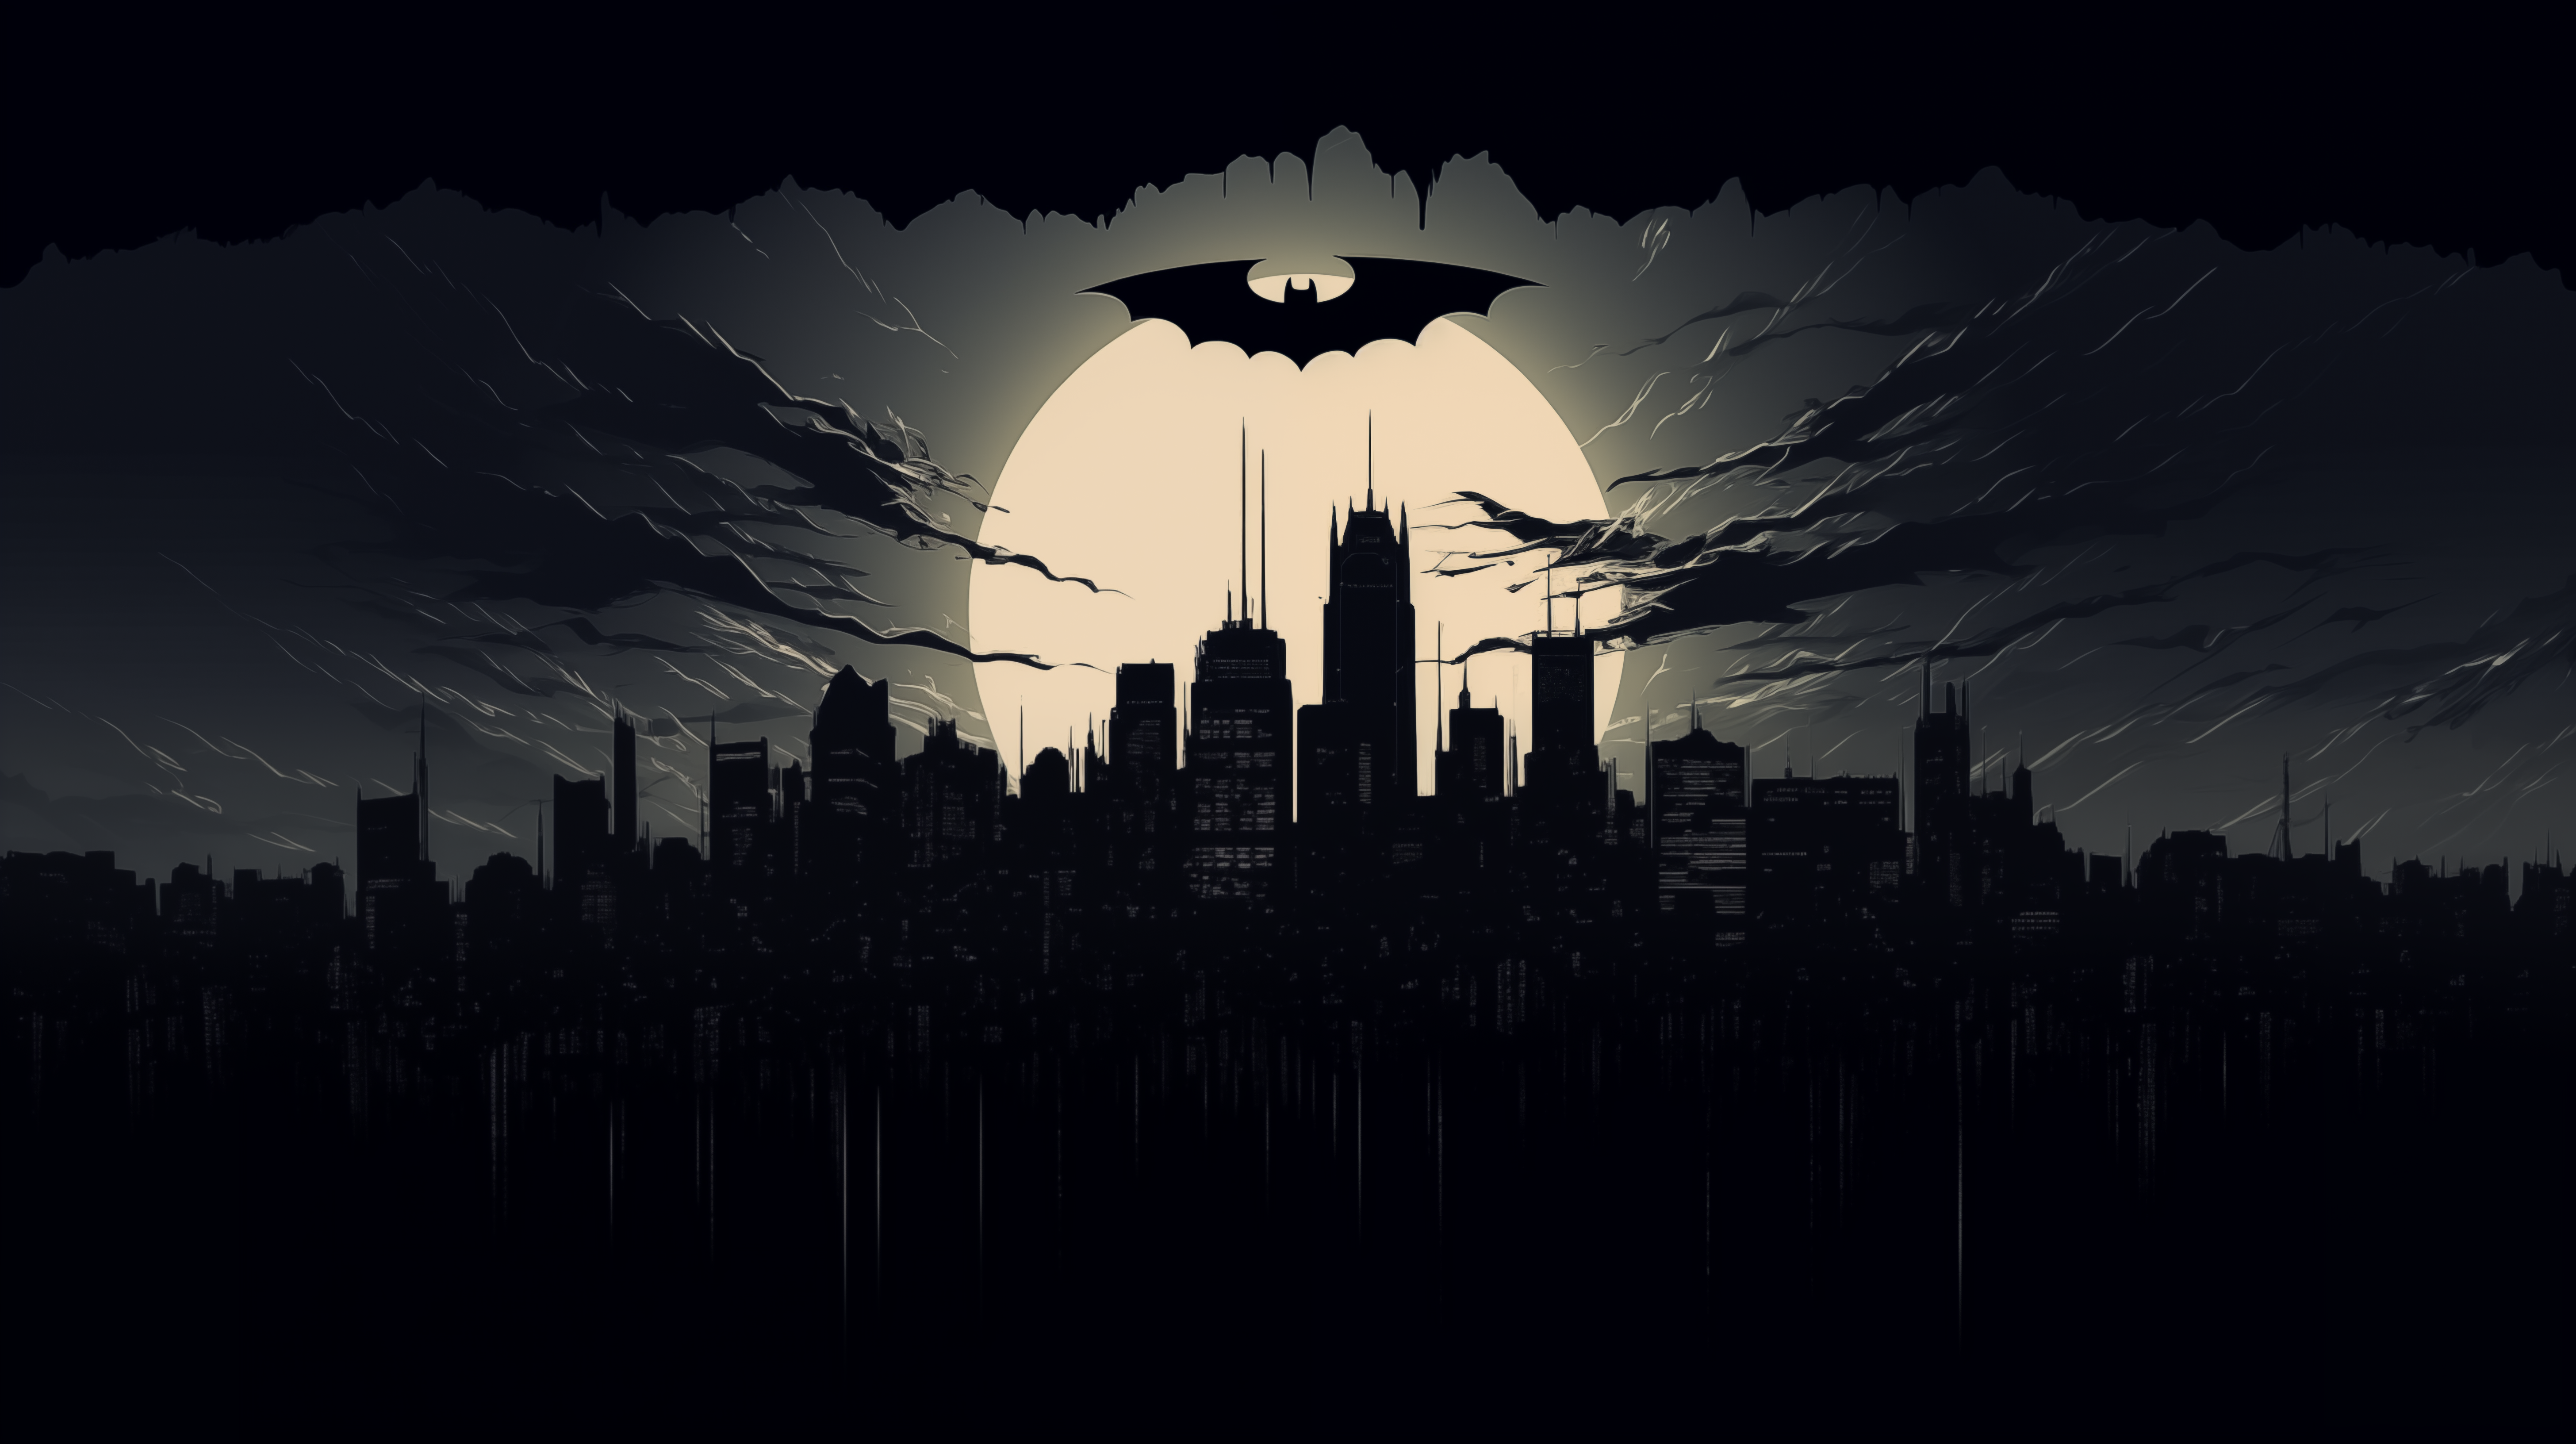 HD wallpaper of a stylized Gotham City skyline silhouette with the iconic Batman logo against a full moon.